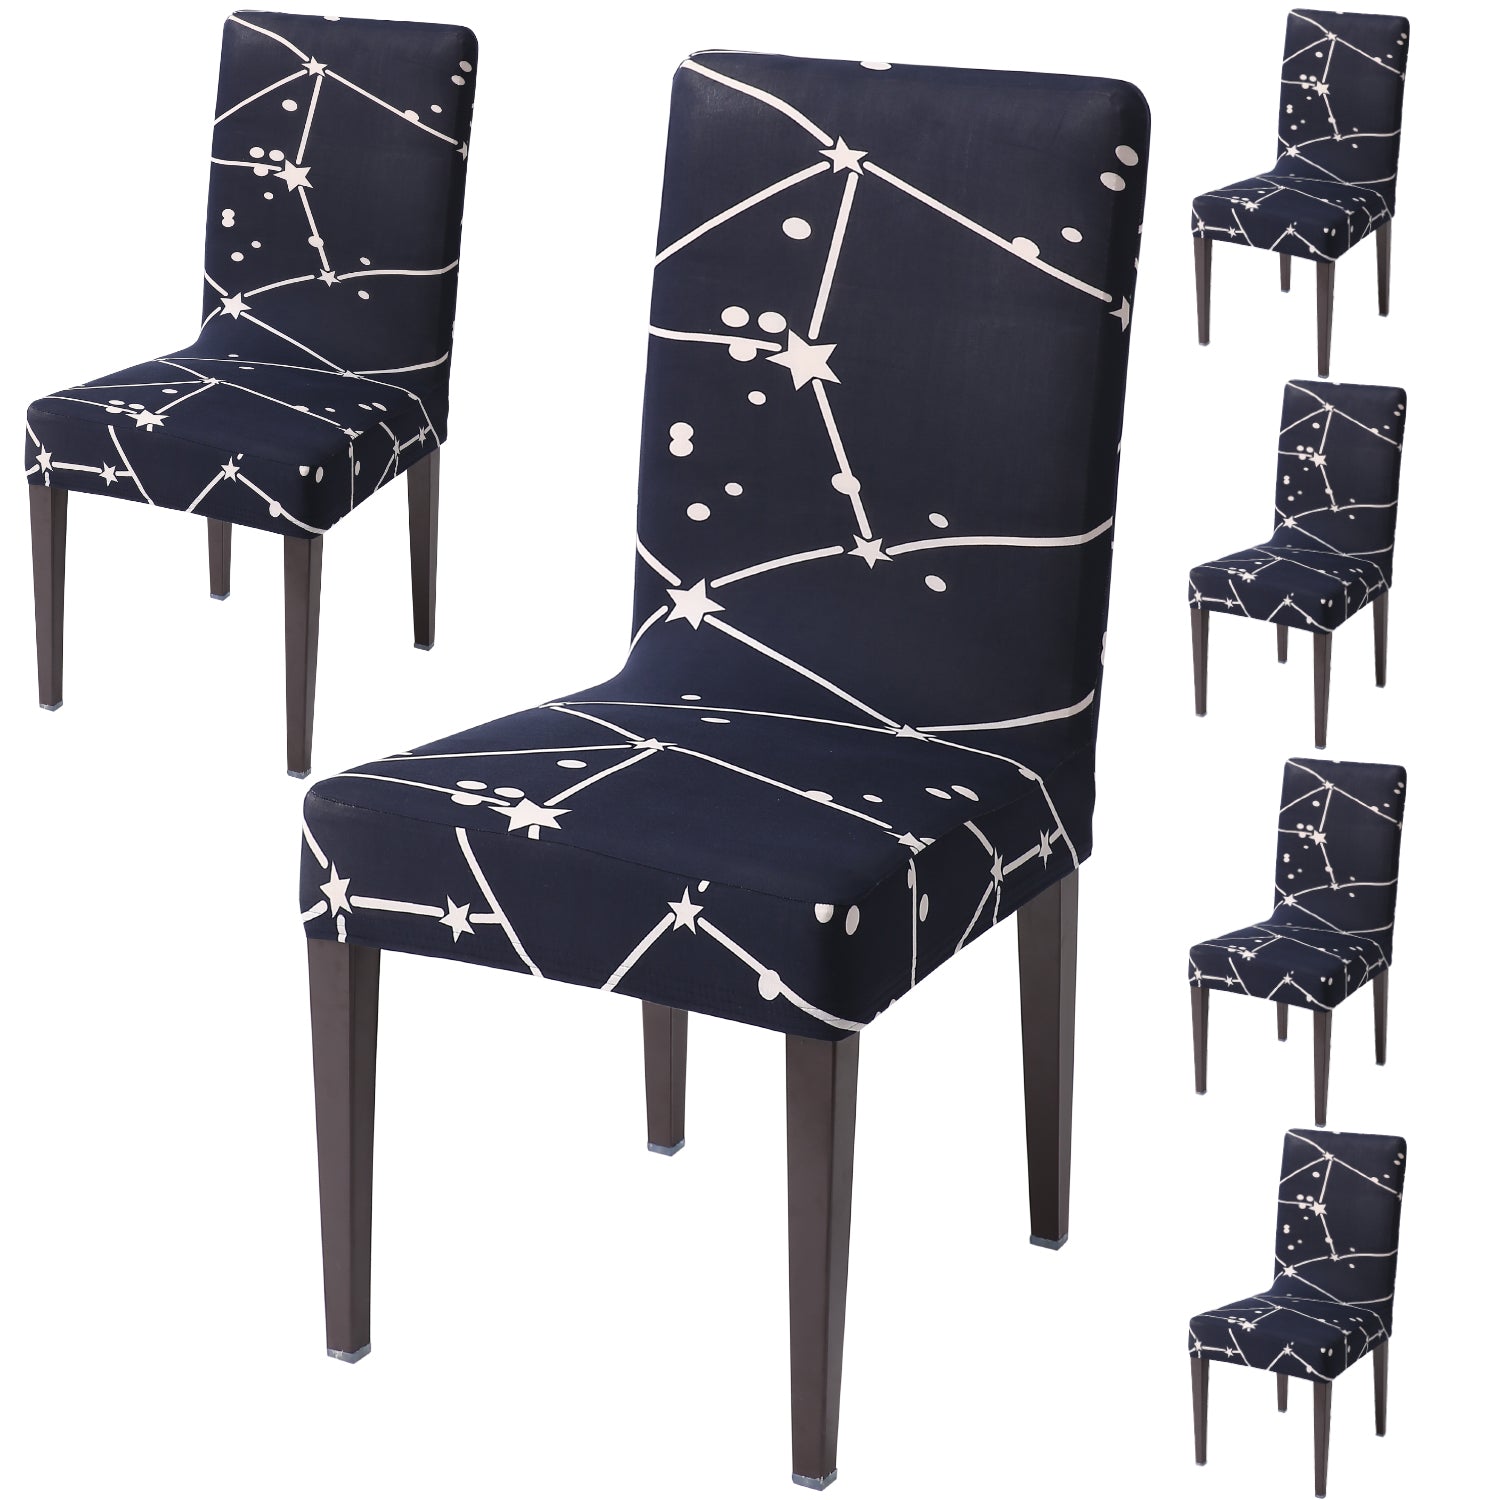 Elastic Stretchable Dining Chair Cover, Midnight Blue